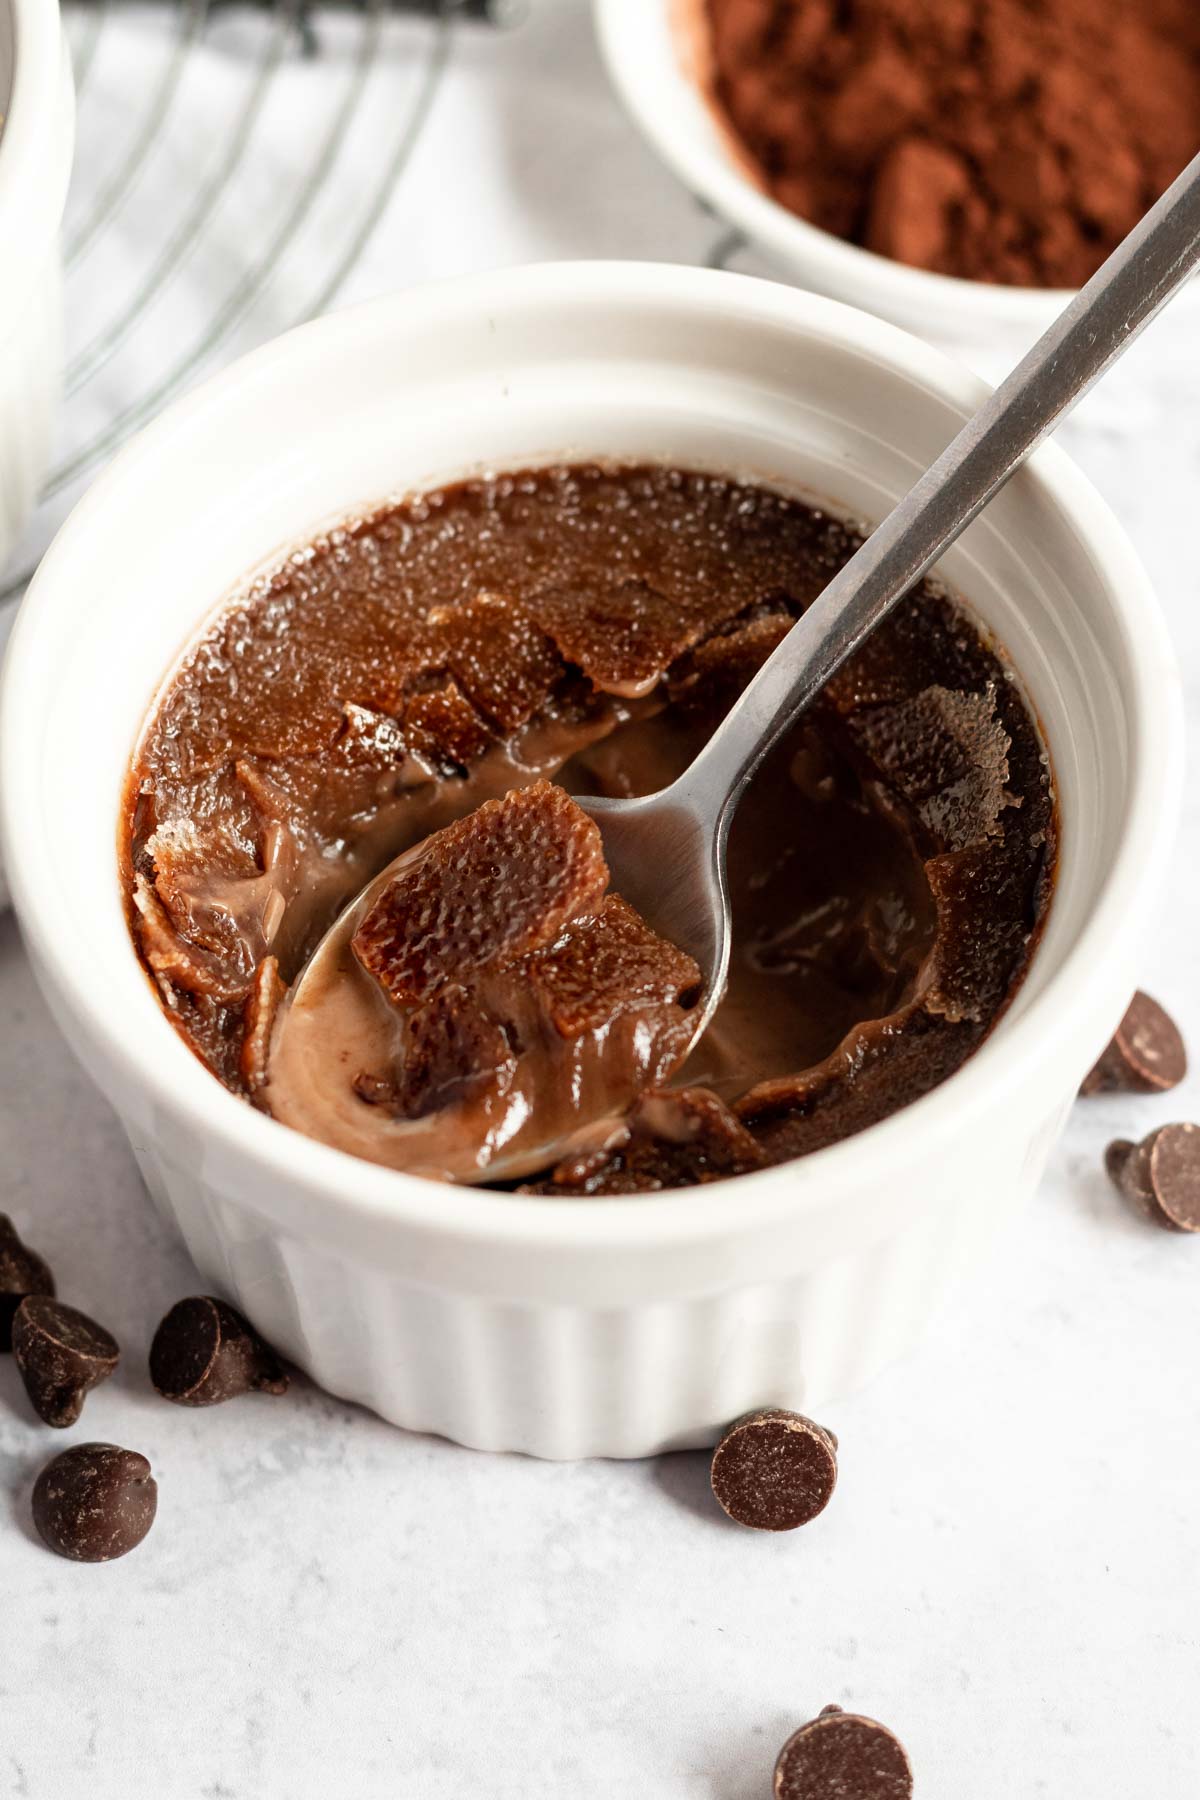 Spoon inserted into a chocolate creme brulee.